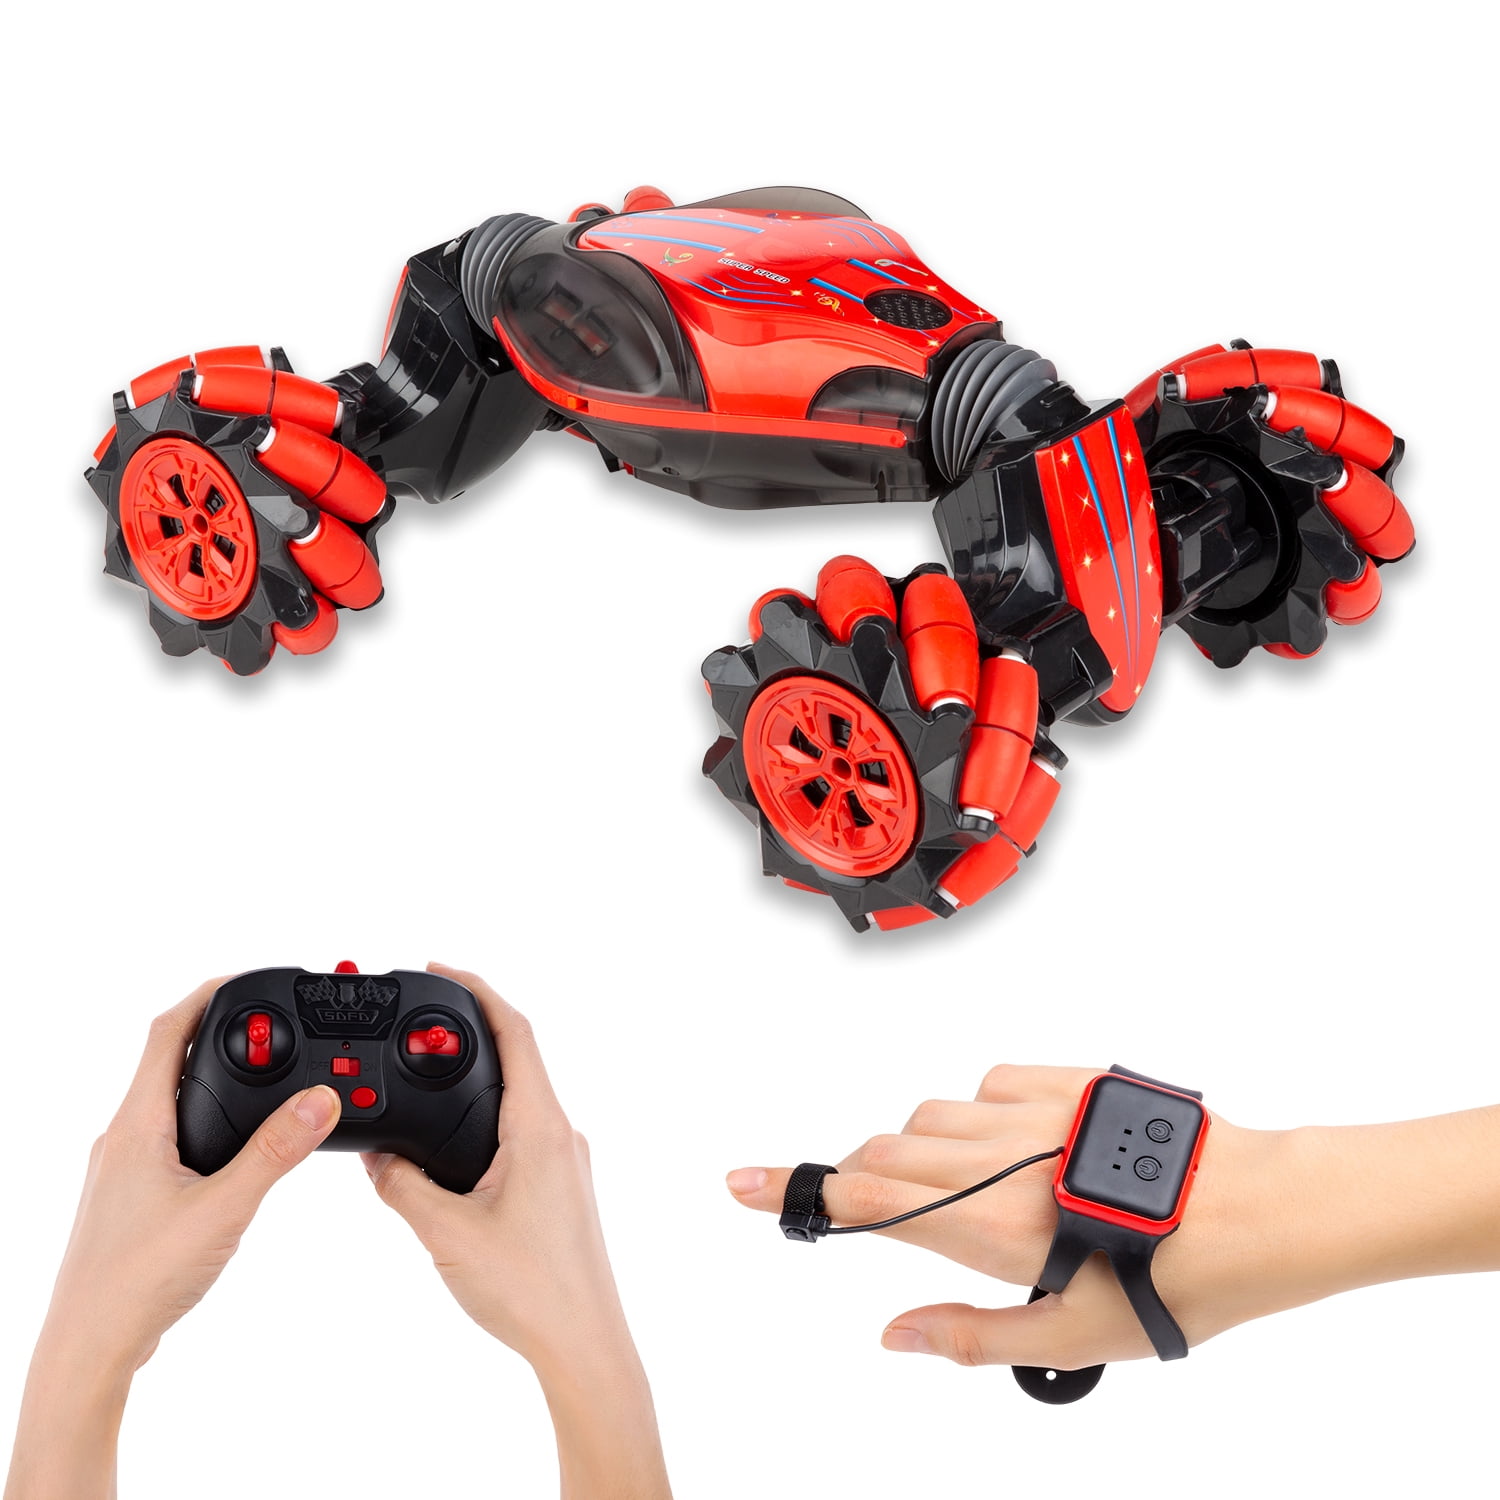 Canopus RC Toy Stunt Car with Gesture Sensor Watch&Remote Control, Red